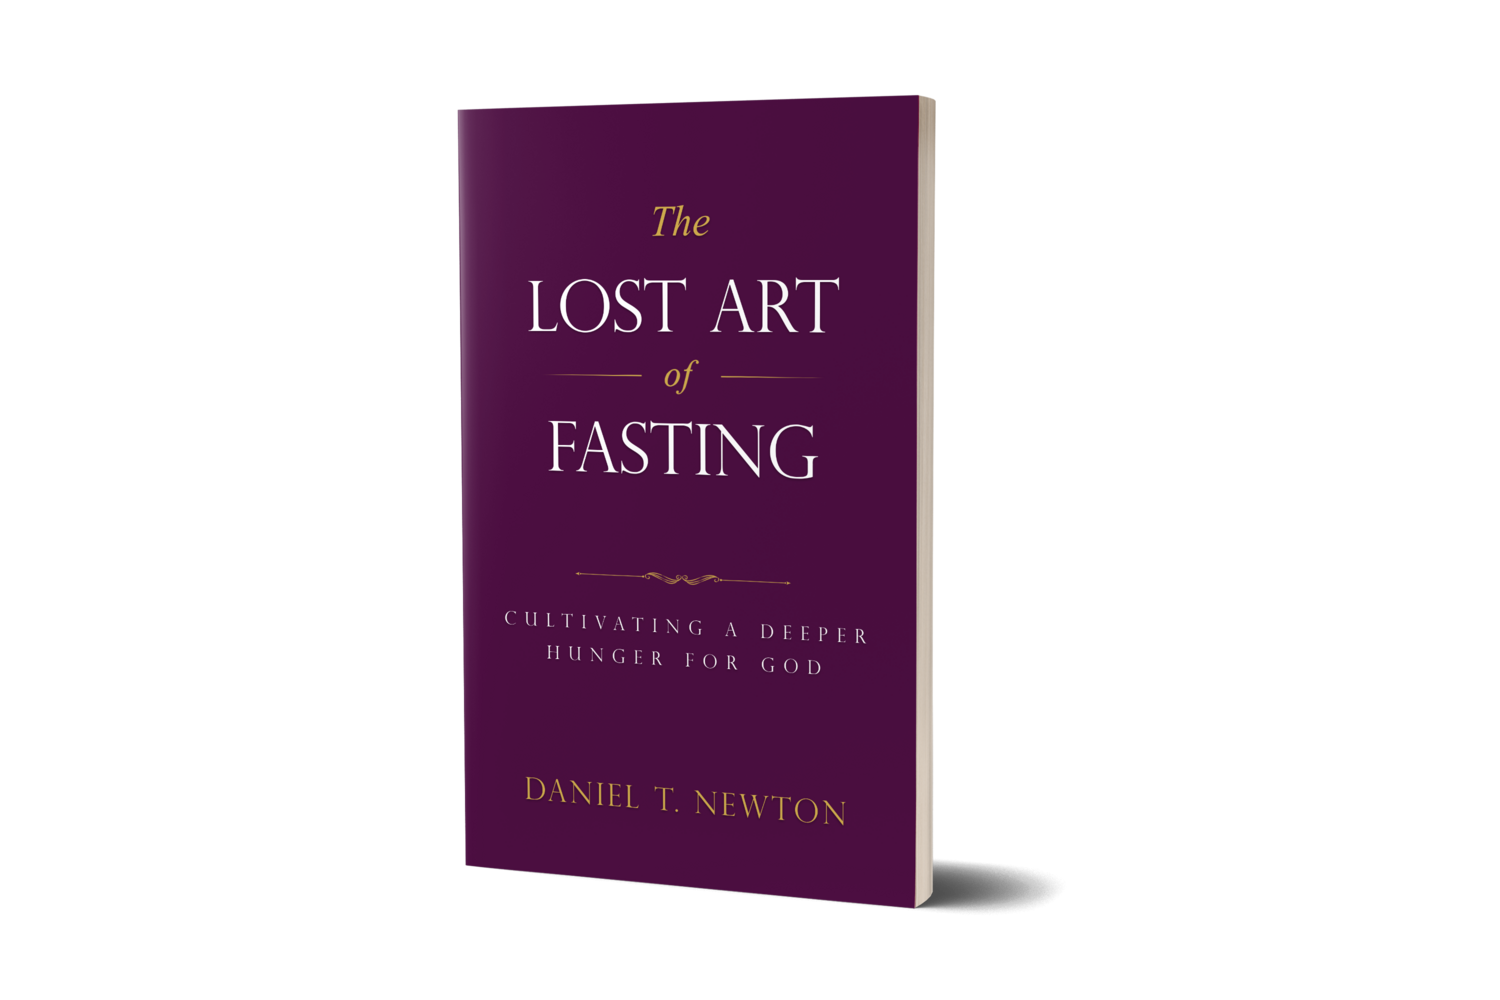 The Lost Art of Fasting